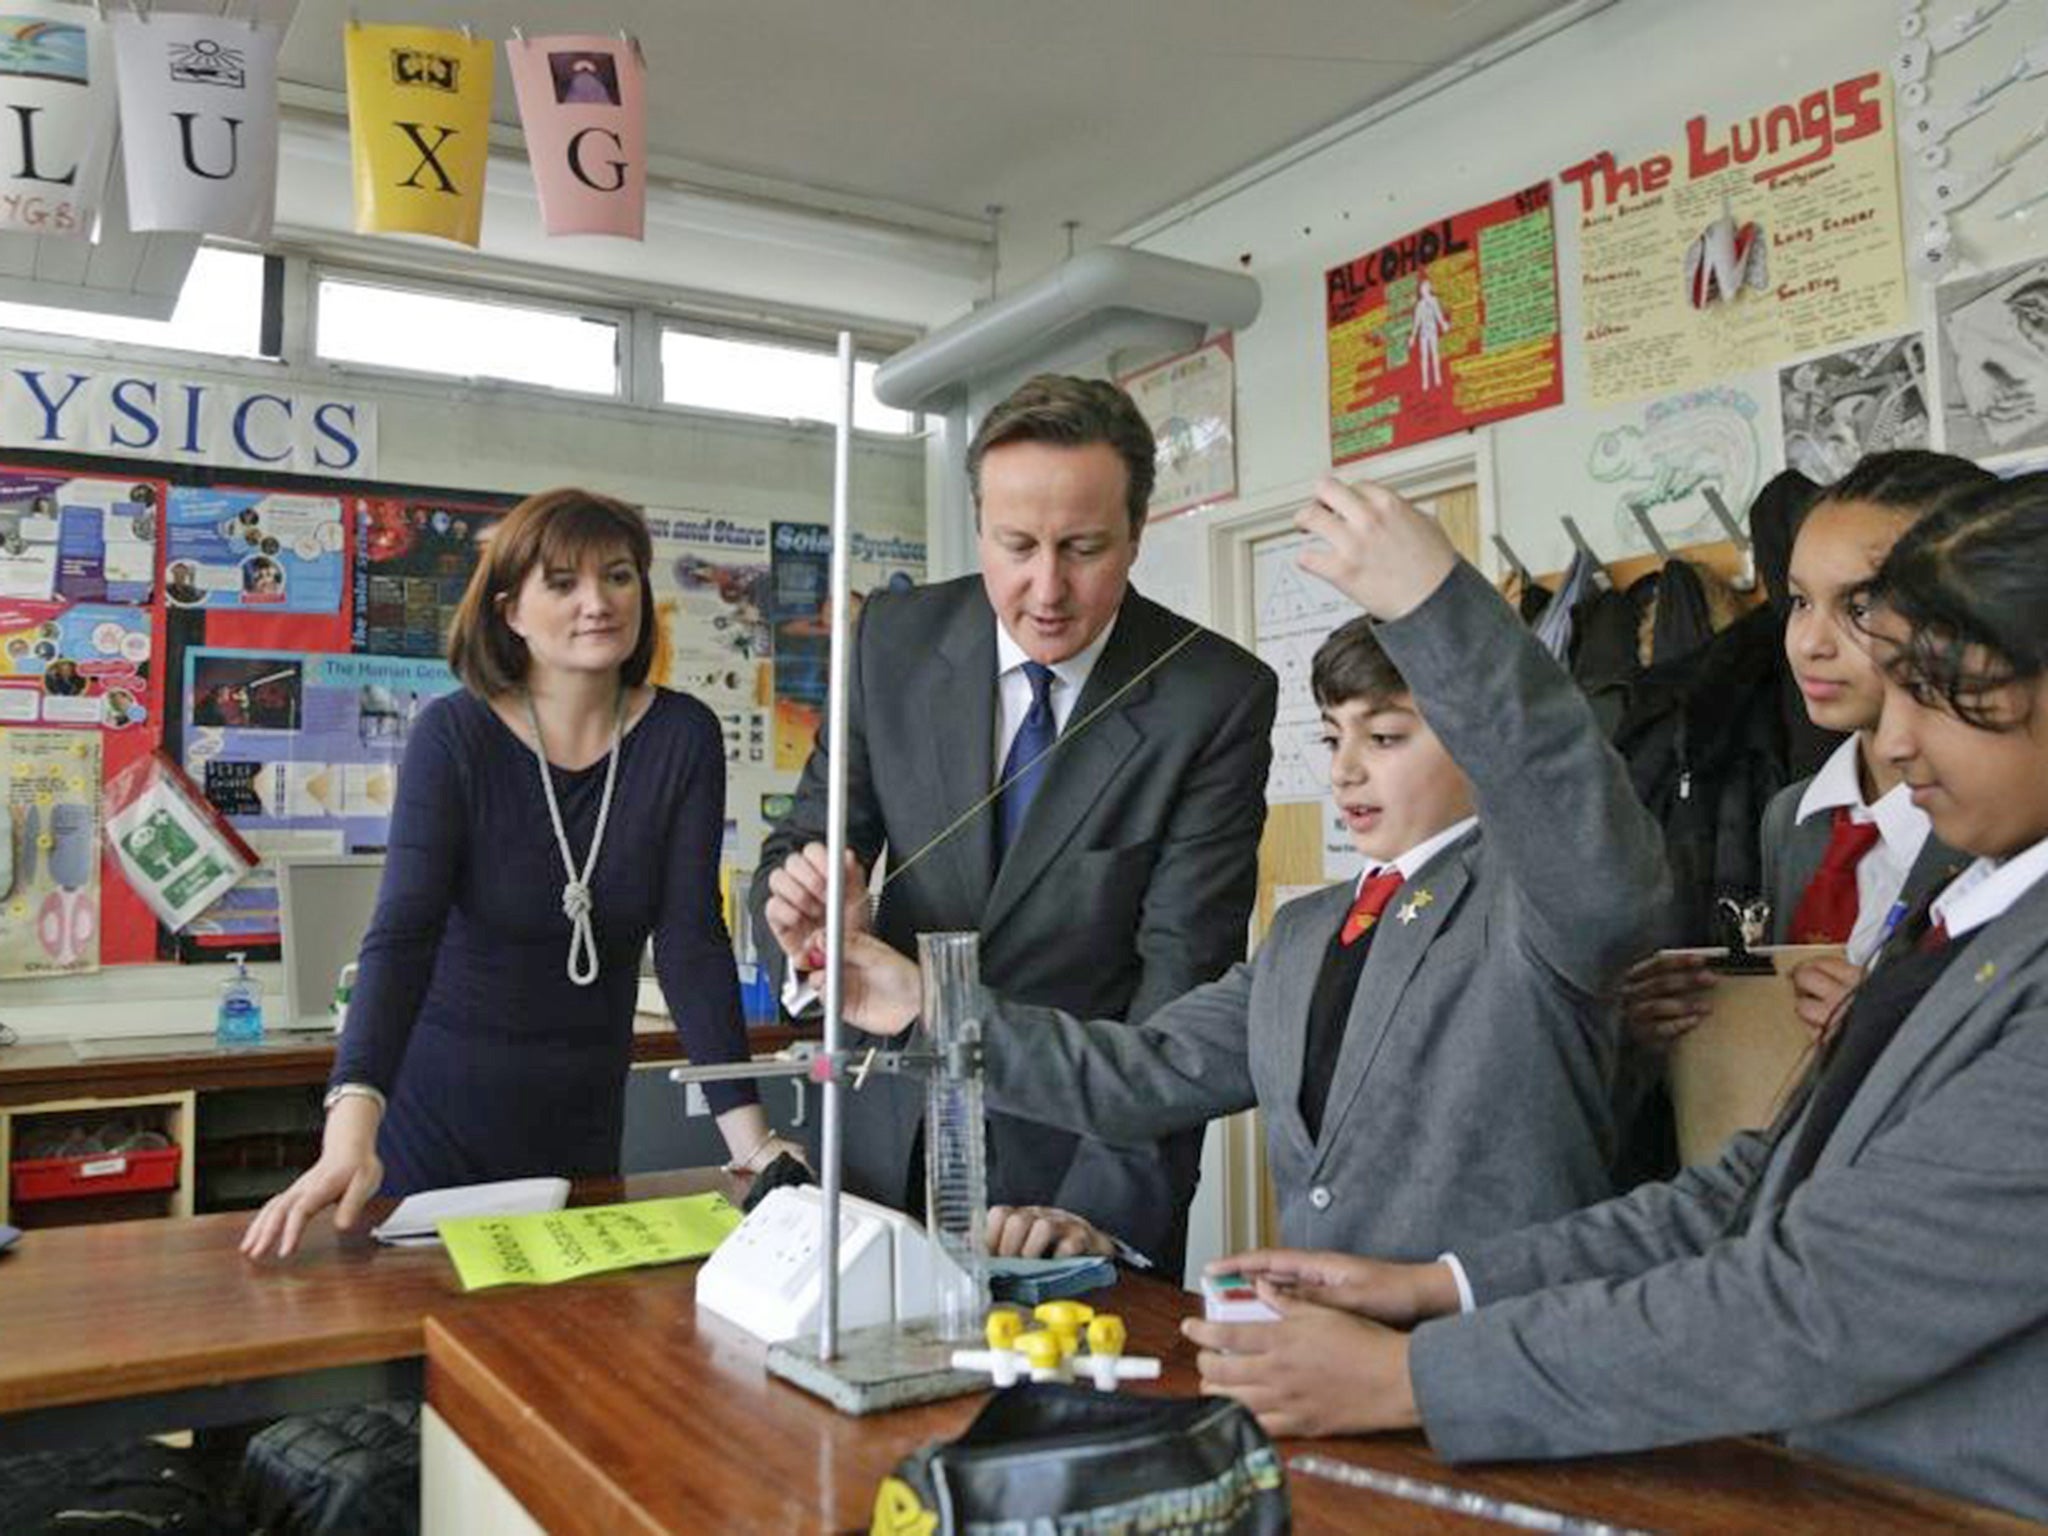 Prime Minister David Cameron and Education Secretary Nicky Morgan taking part in an experiment in a science classroom with pupils